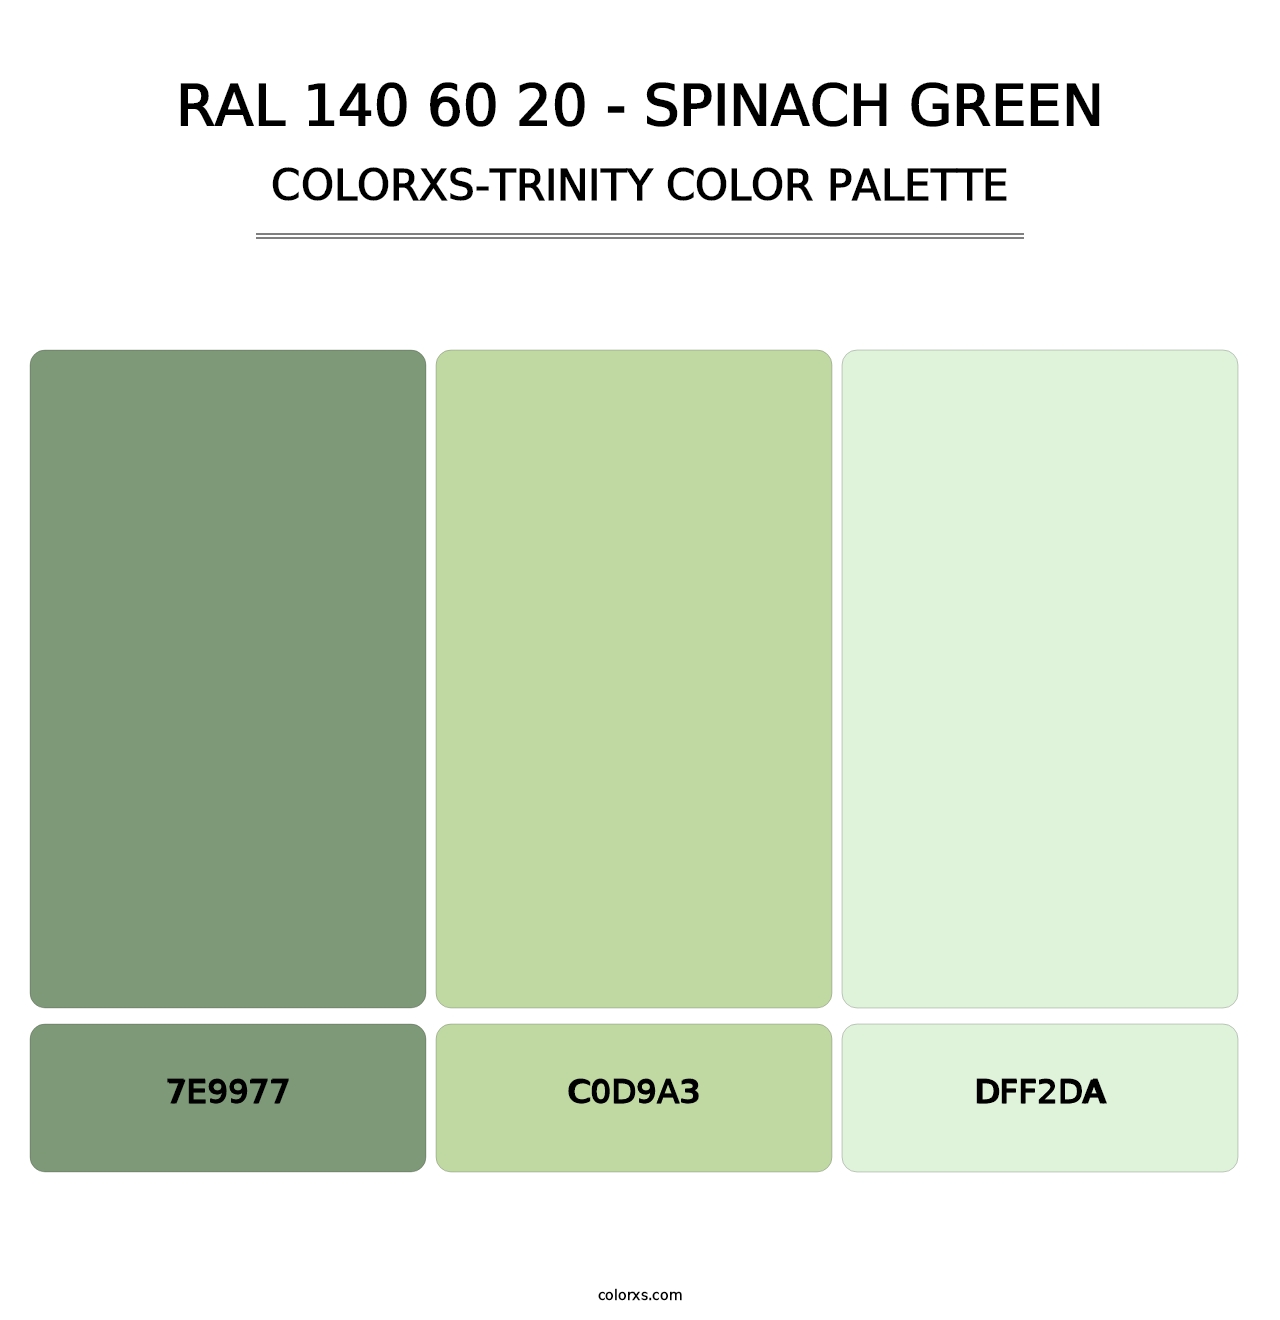 RAL 140 60 20 - Spinach Green - Colorxs Trinity Palette